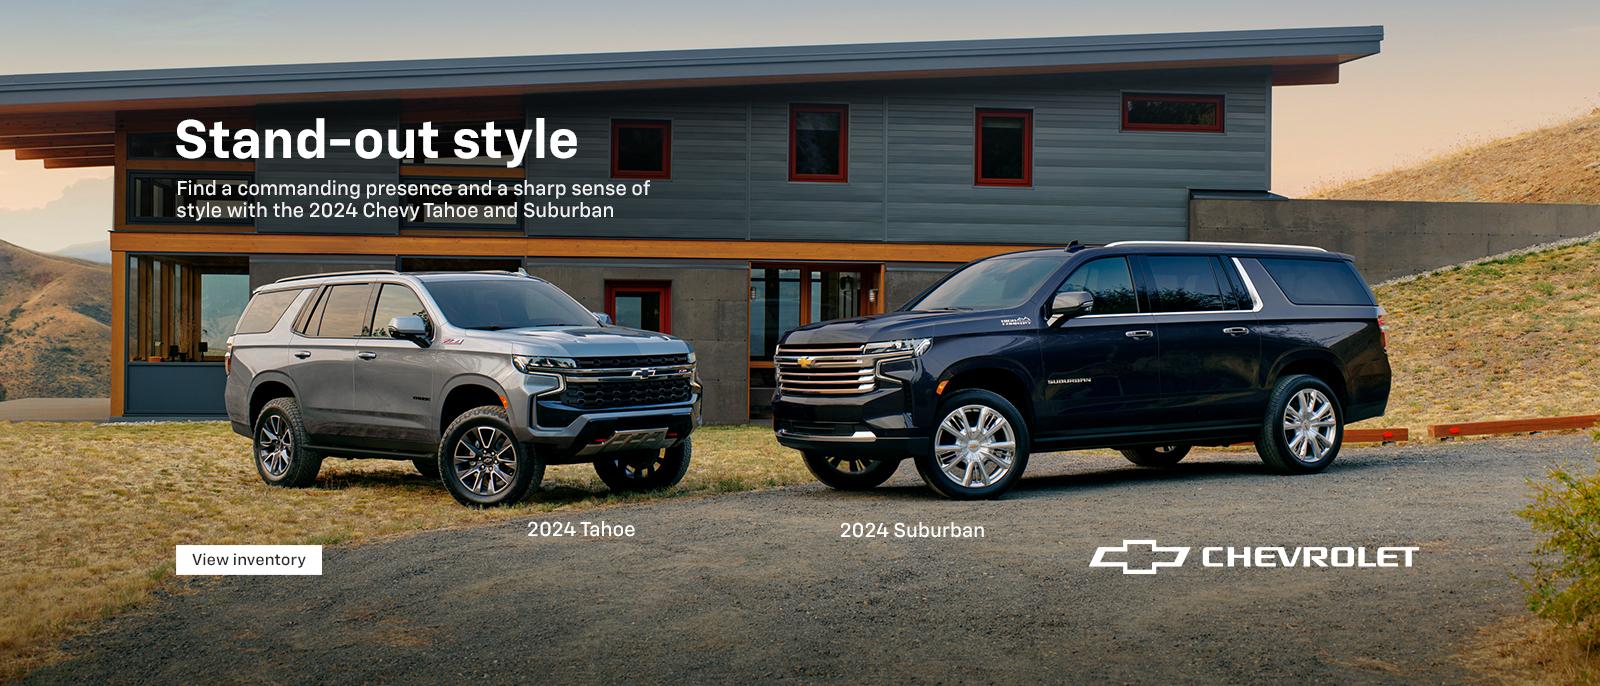 Stand-out style. Find a commanding presence and a sharp sense of style with the 2024 Chevy Tahoe and Suburban.